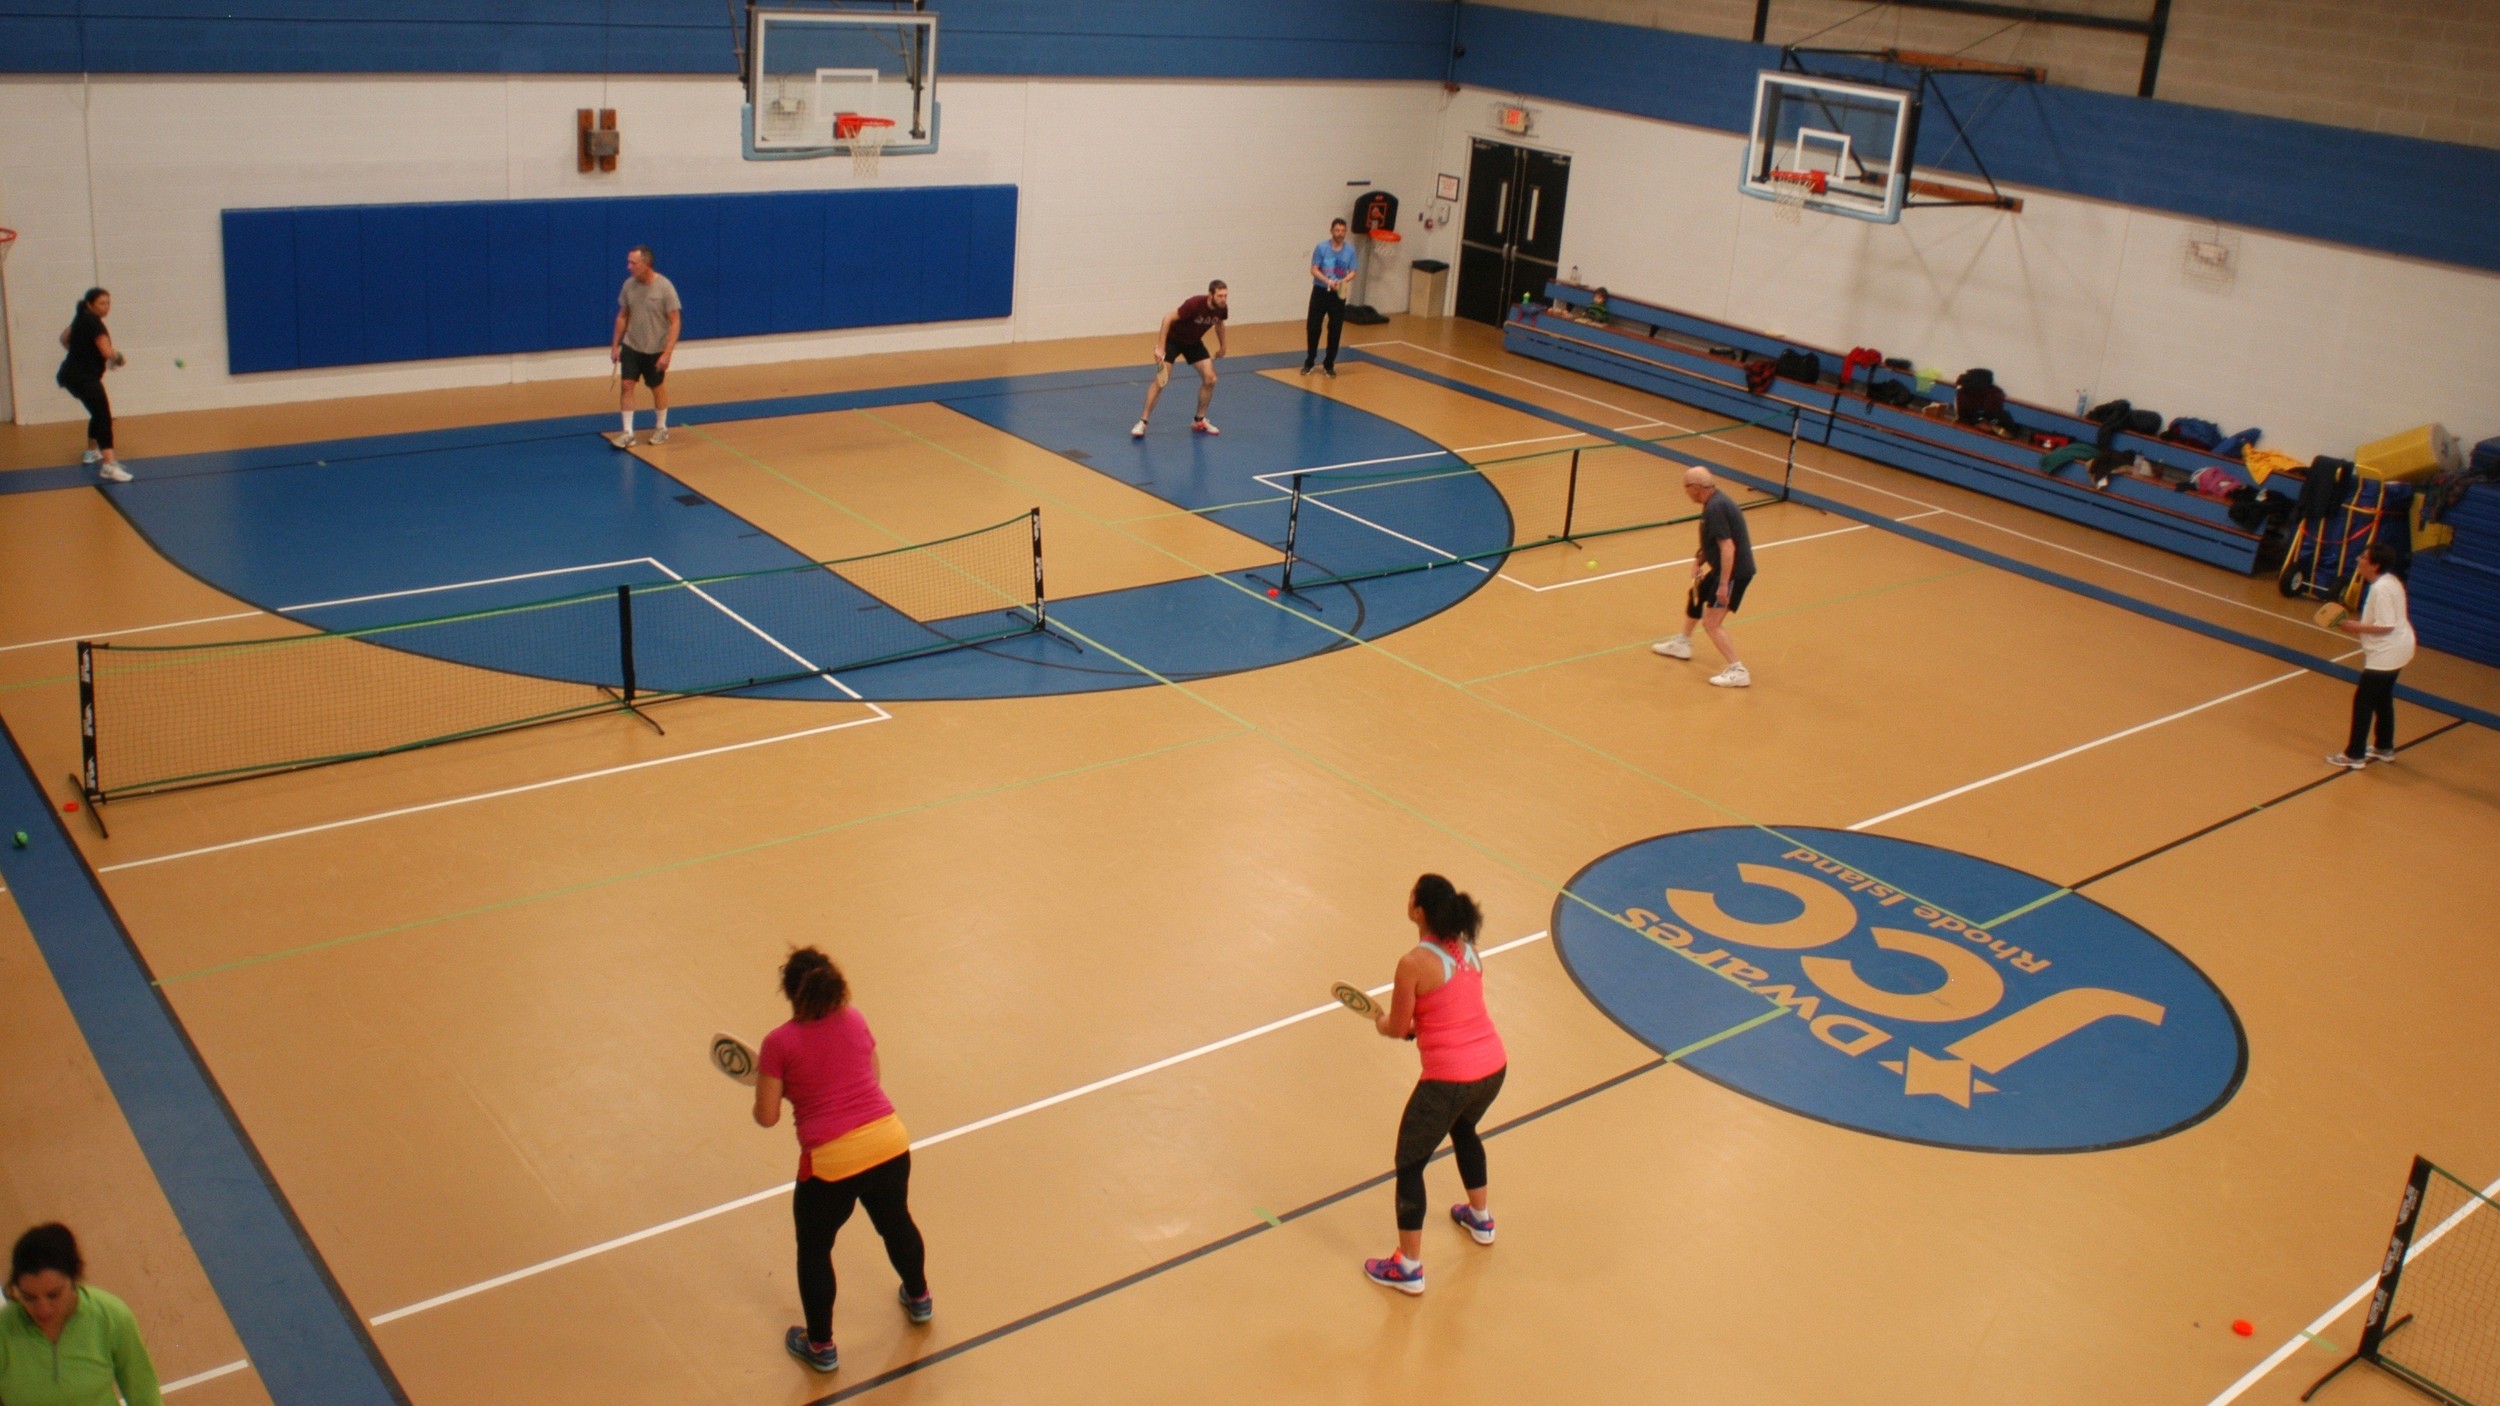 Players enjoy and evening of friendly paddleball games with seven teams of two or three players in a round robin competition.